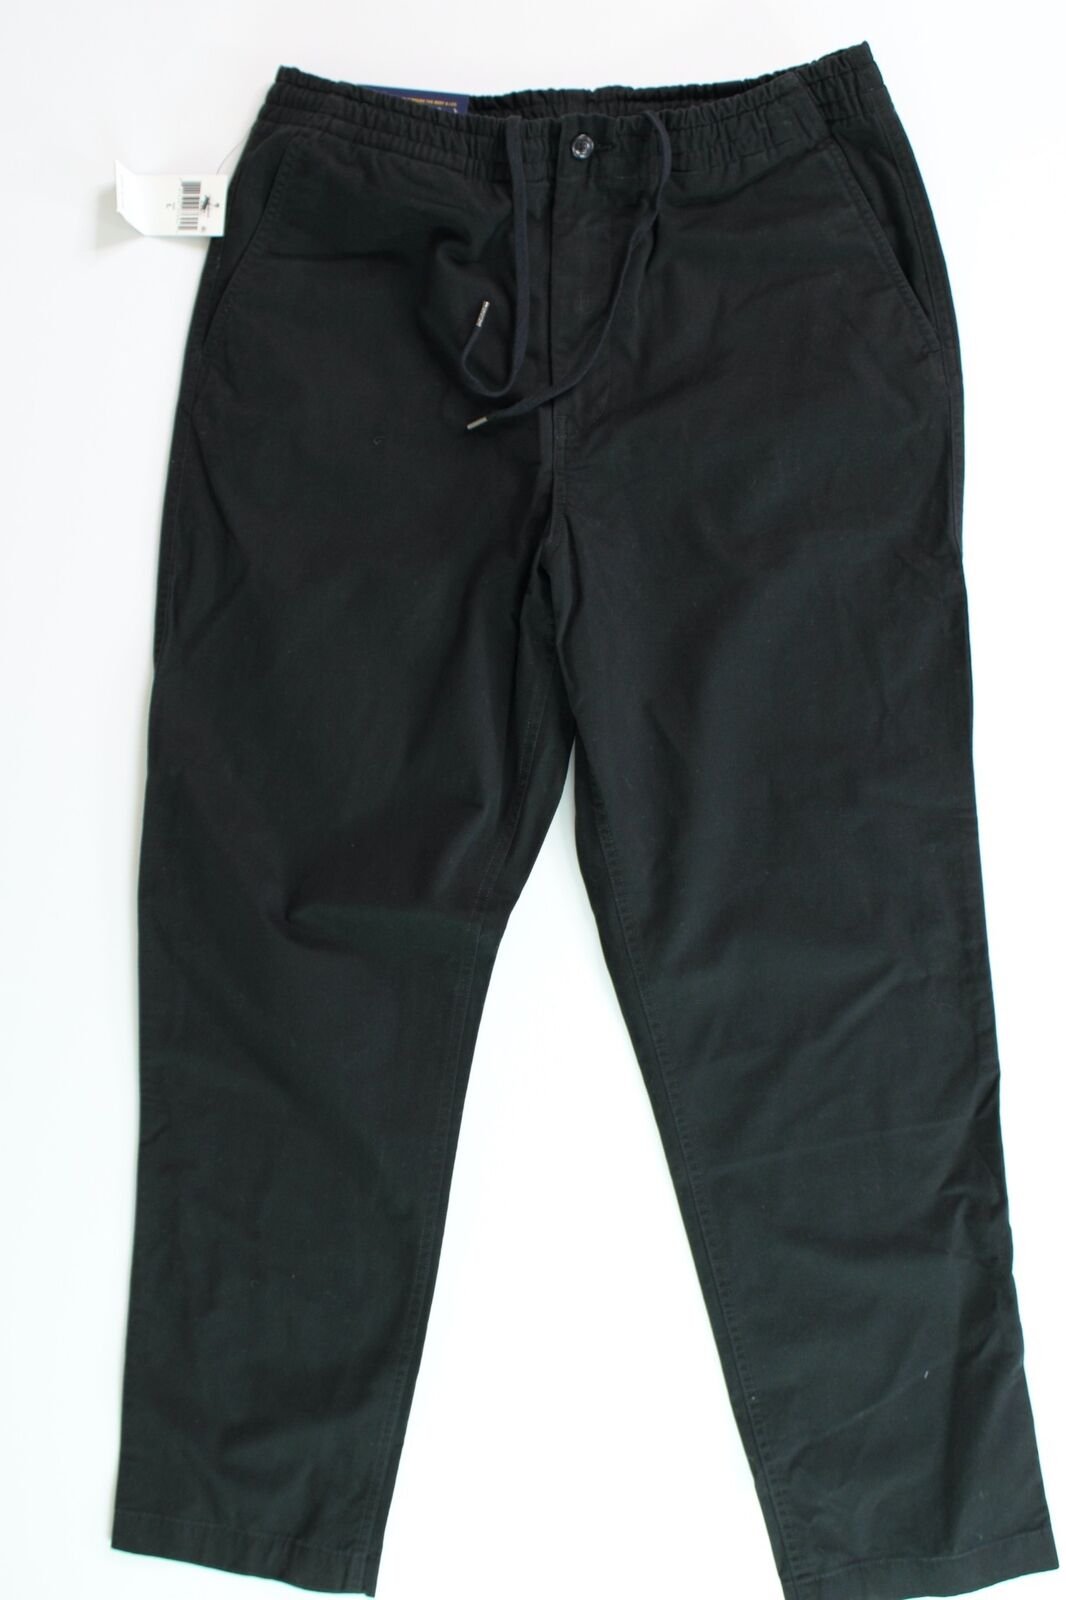 POLO RALPH LAUREN Men's Relaxed Fit Polo Prepster Twill Pants Small Black